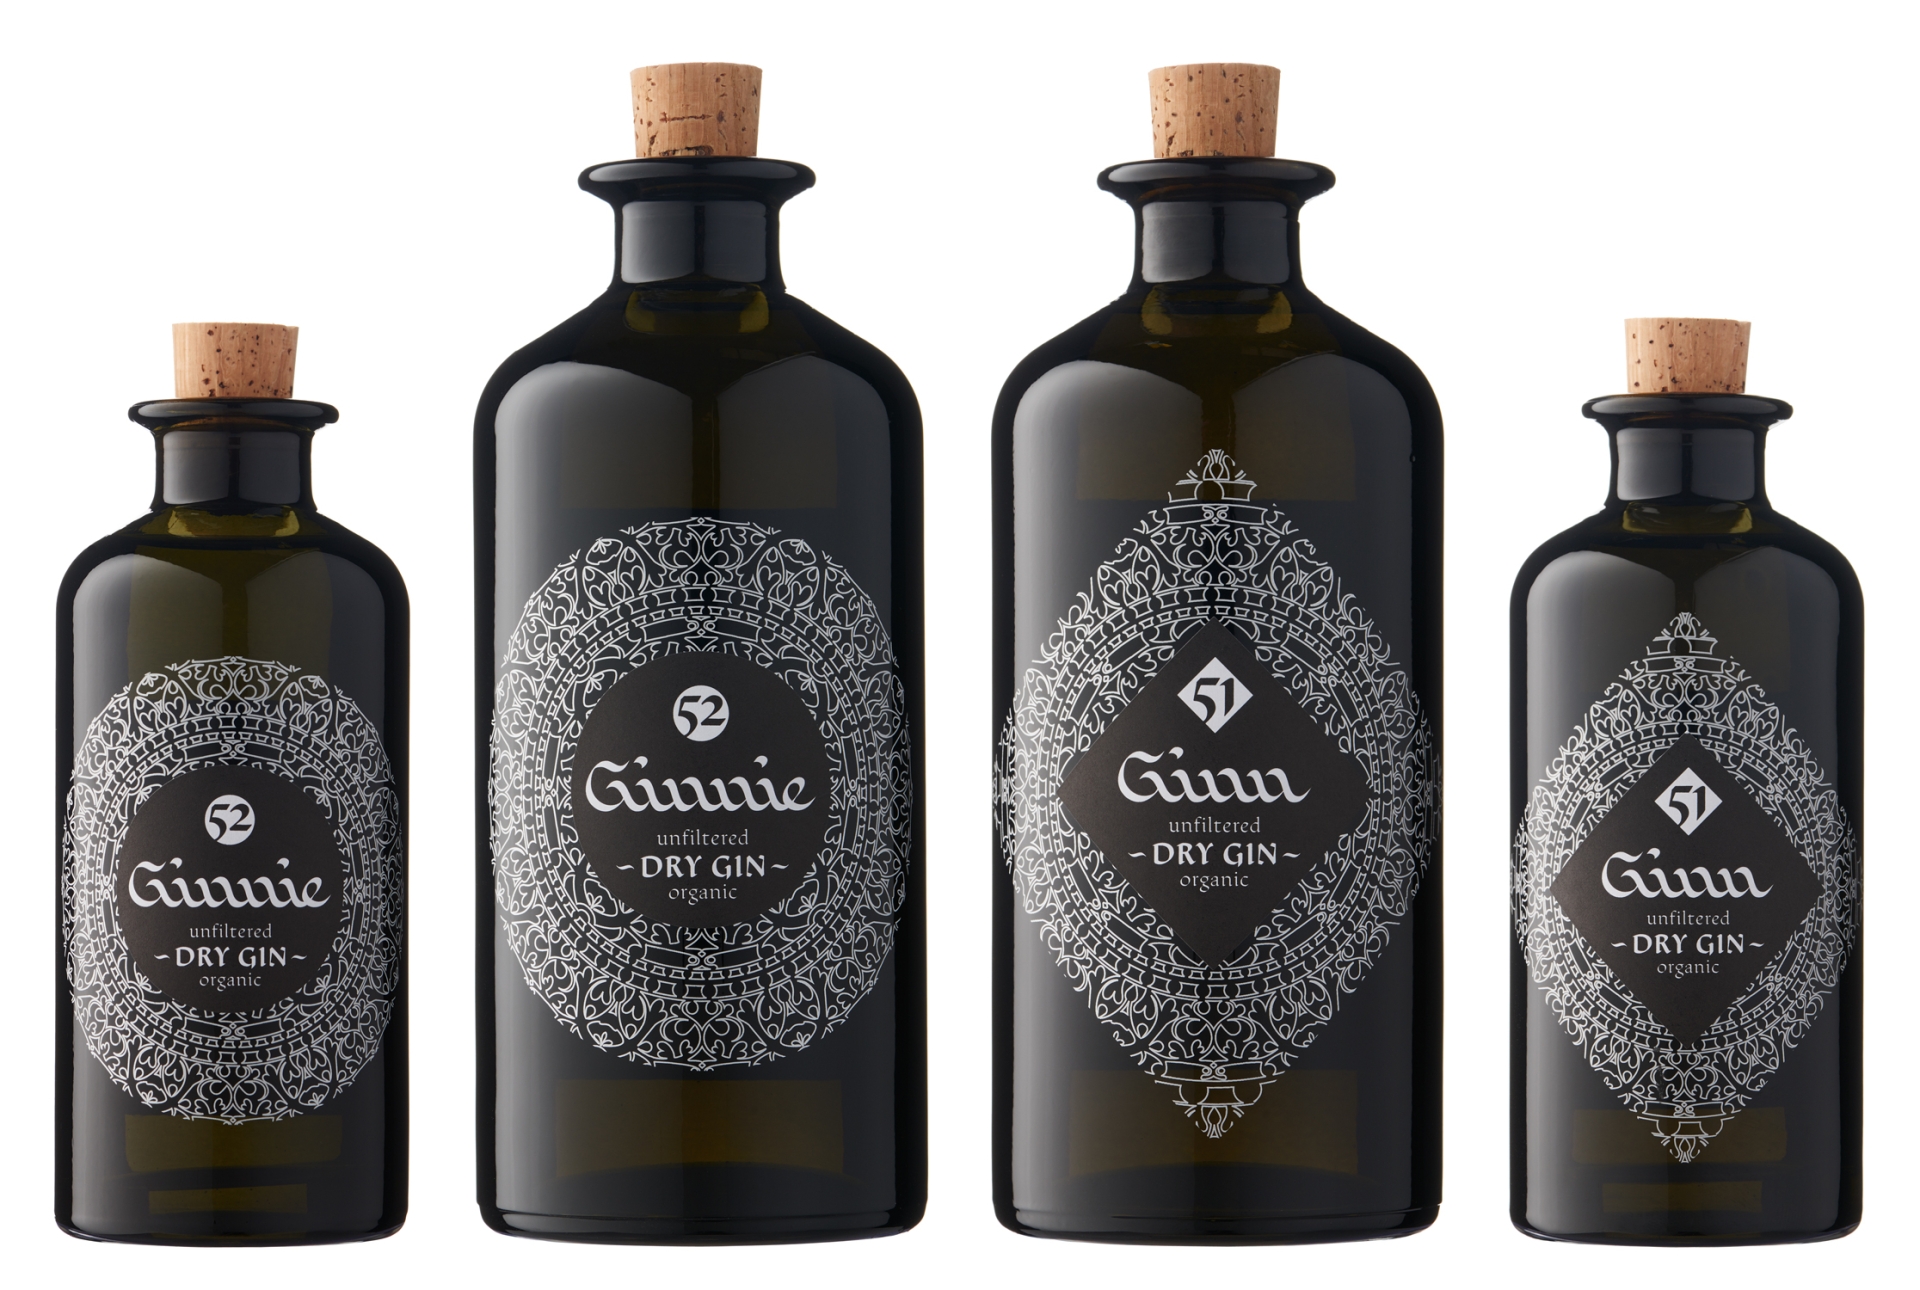 Flavors and sensory - Ginn and Ginnie bottles